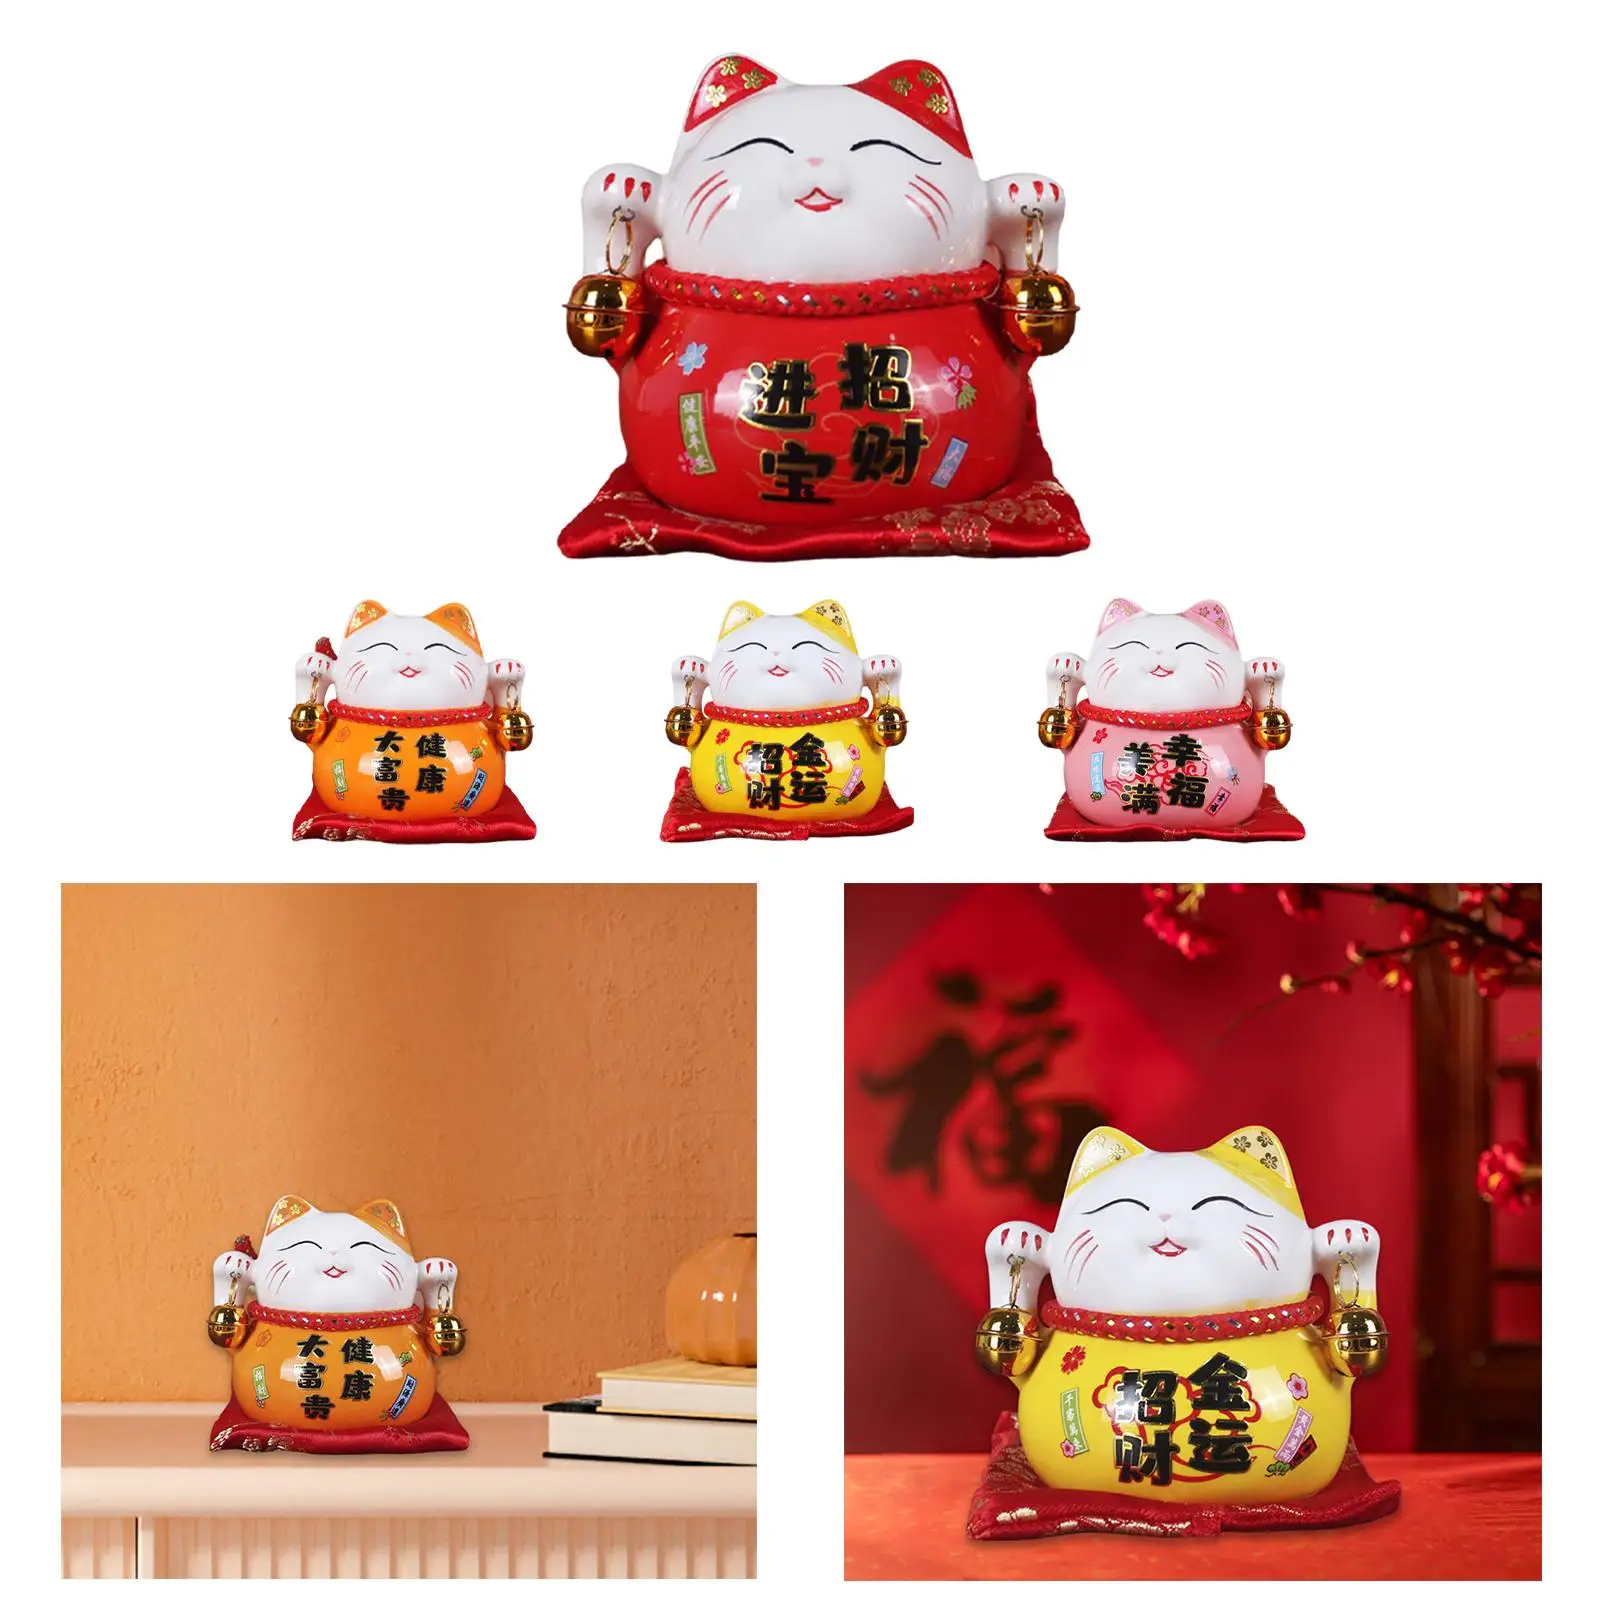 Modern Lucky Cat Piggy Bank Animal Statue Money Storage Box Decorative Porcelain Collectible Toy for Home Decoration Desk Office